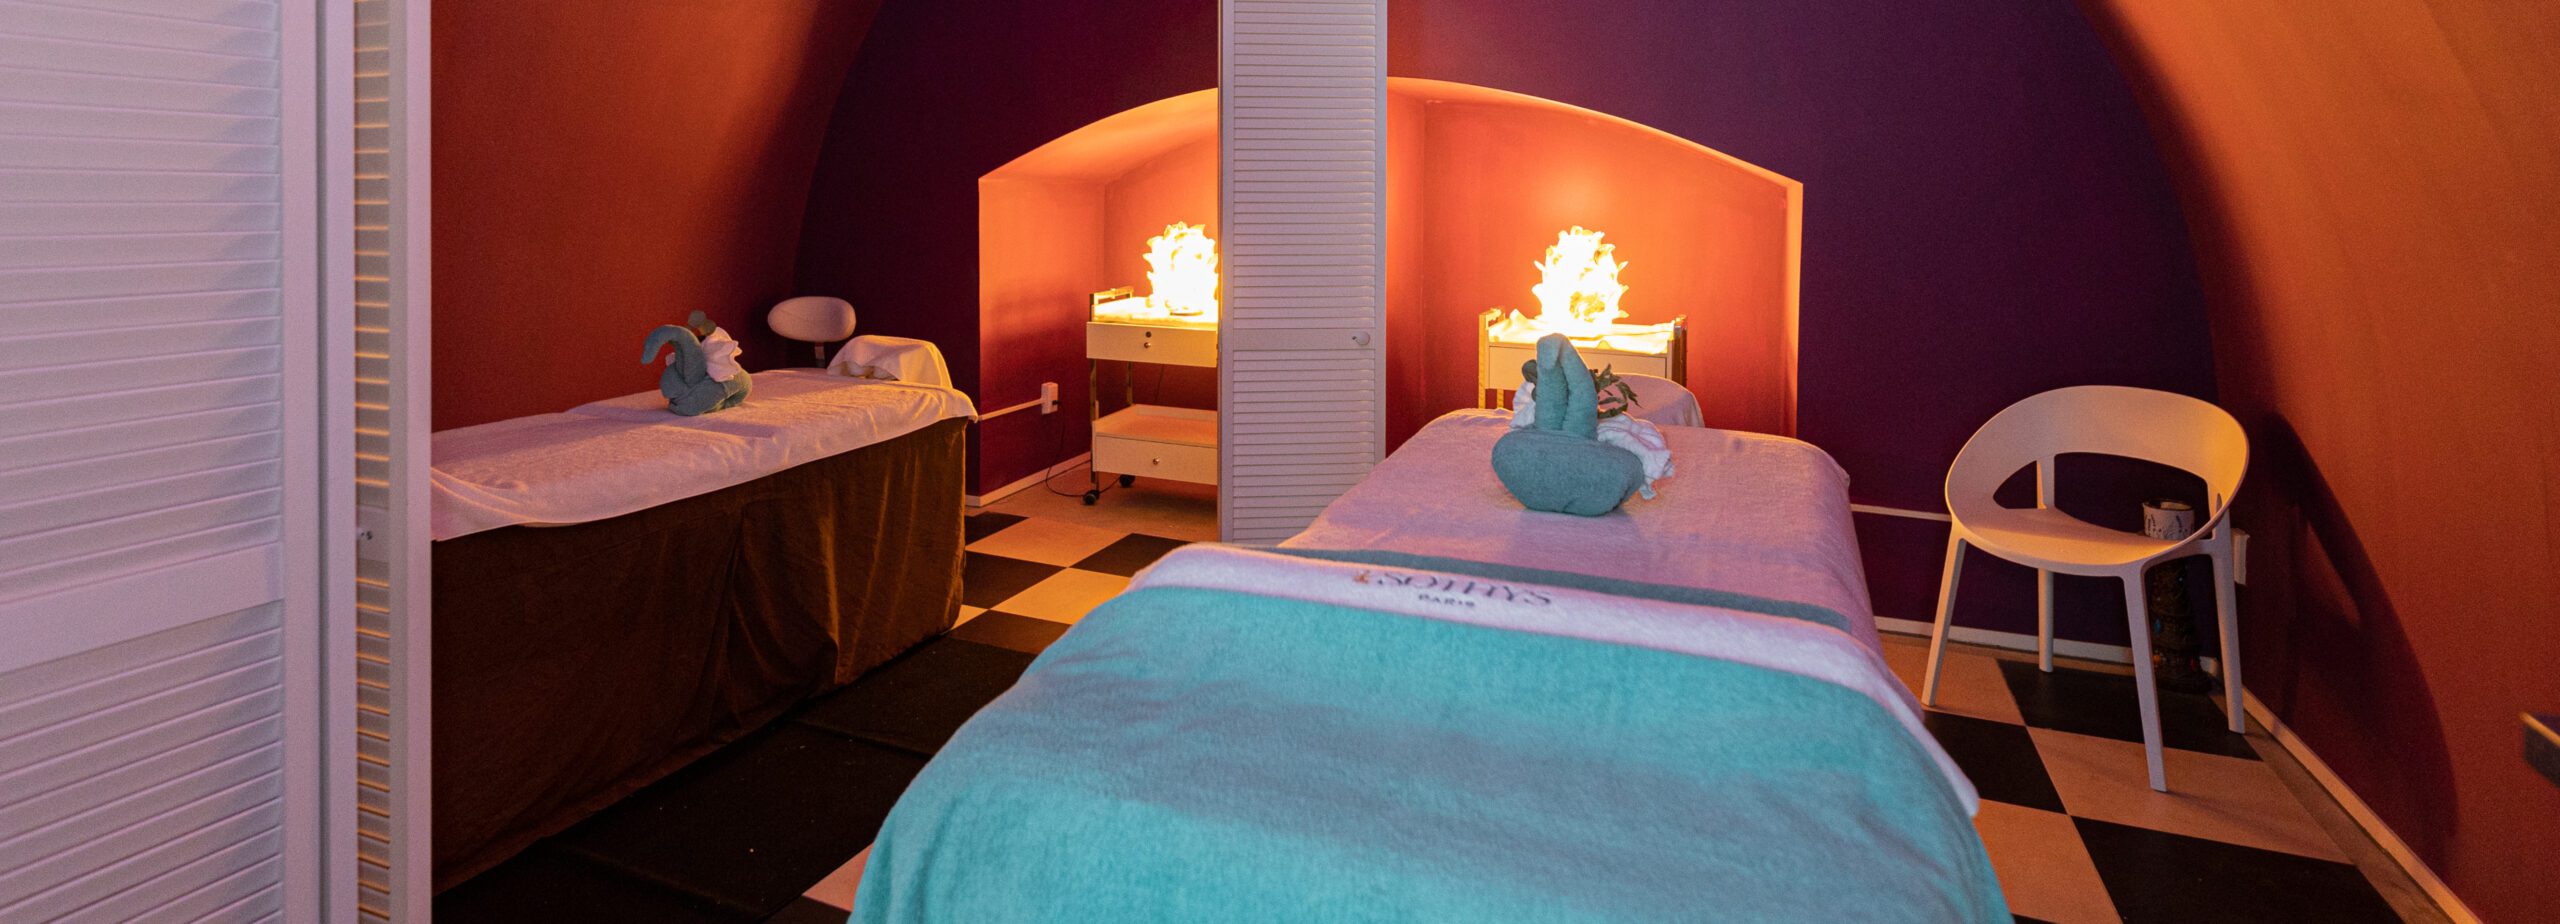 Massage Therapy Room - Natural Blends Esthetics